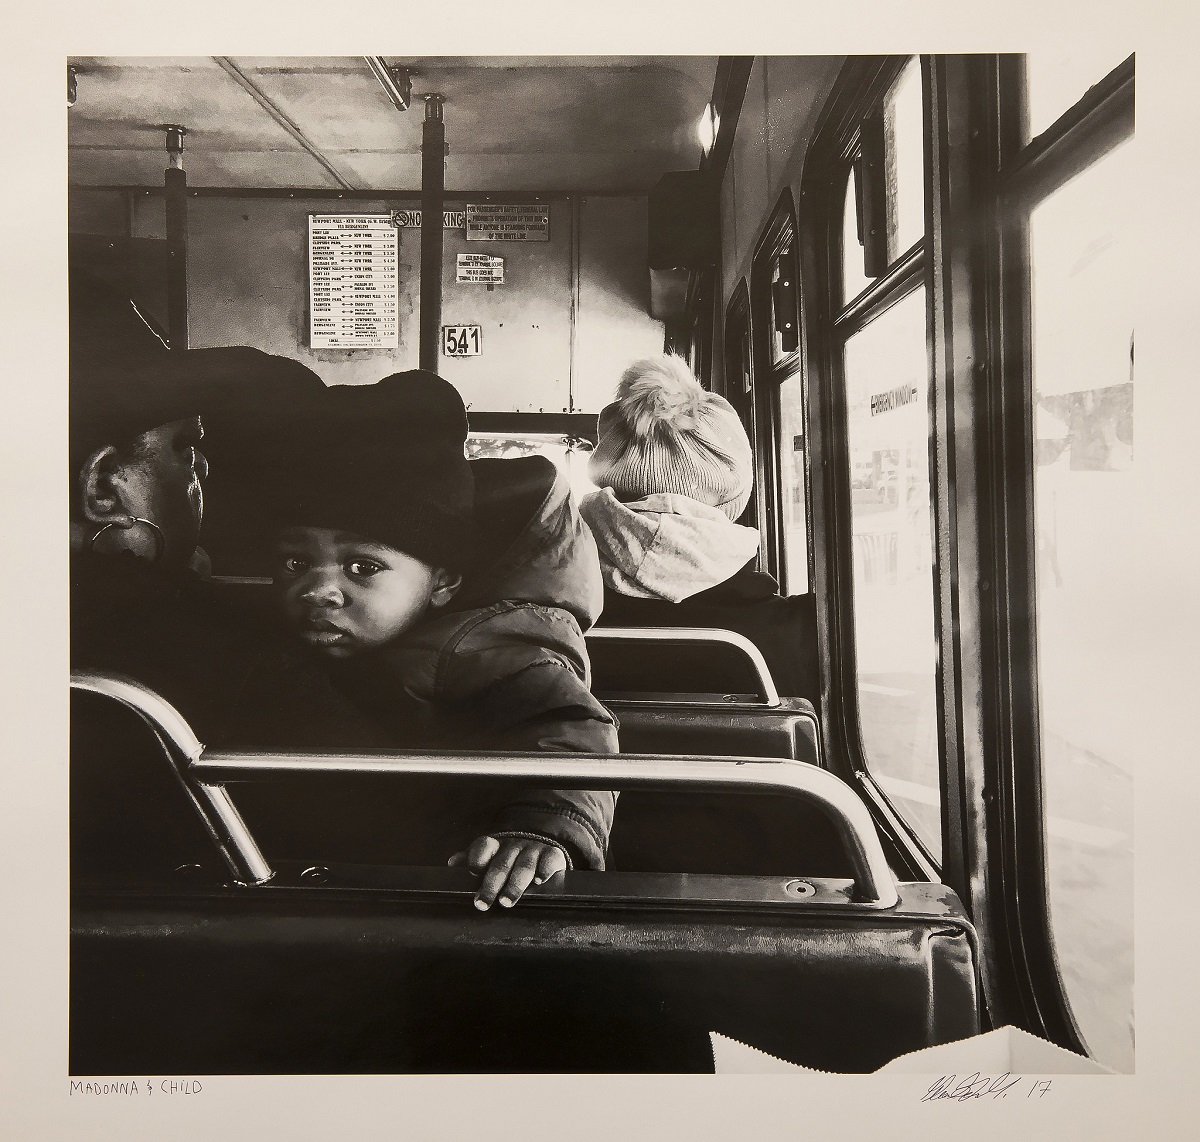 Pictured here, Madonna and Child, a photograph from the Hudson County Community College (HCCC) Foundation Art Collection by Gabriela Gomez. The work, winner of a 2018 HCCC Foundation Student Art Award, will be displayed in the Pop-up Gallery at the HCCC Foundation Gala on Thursday evening, December 8, 2022.